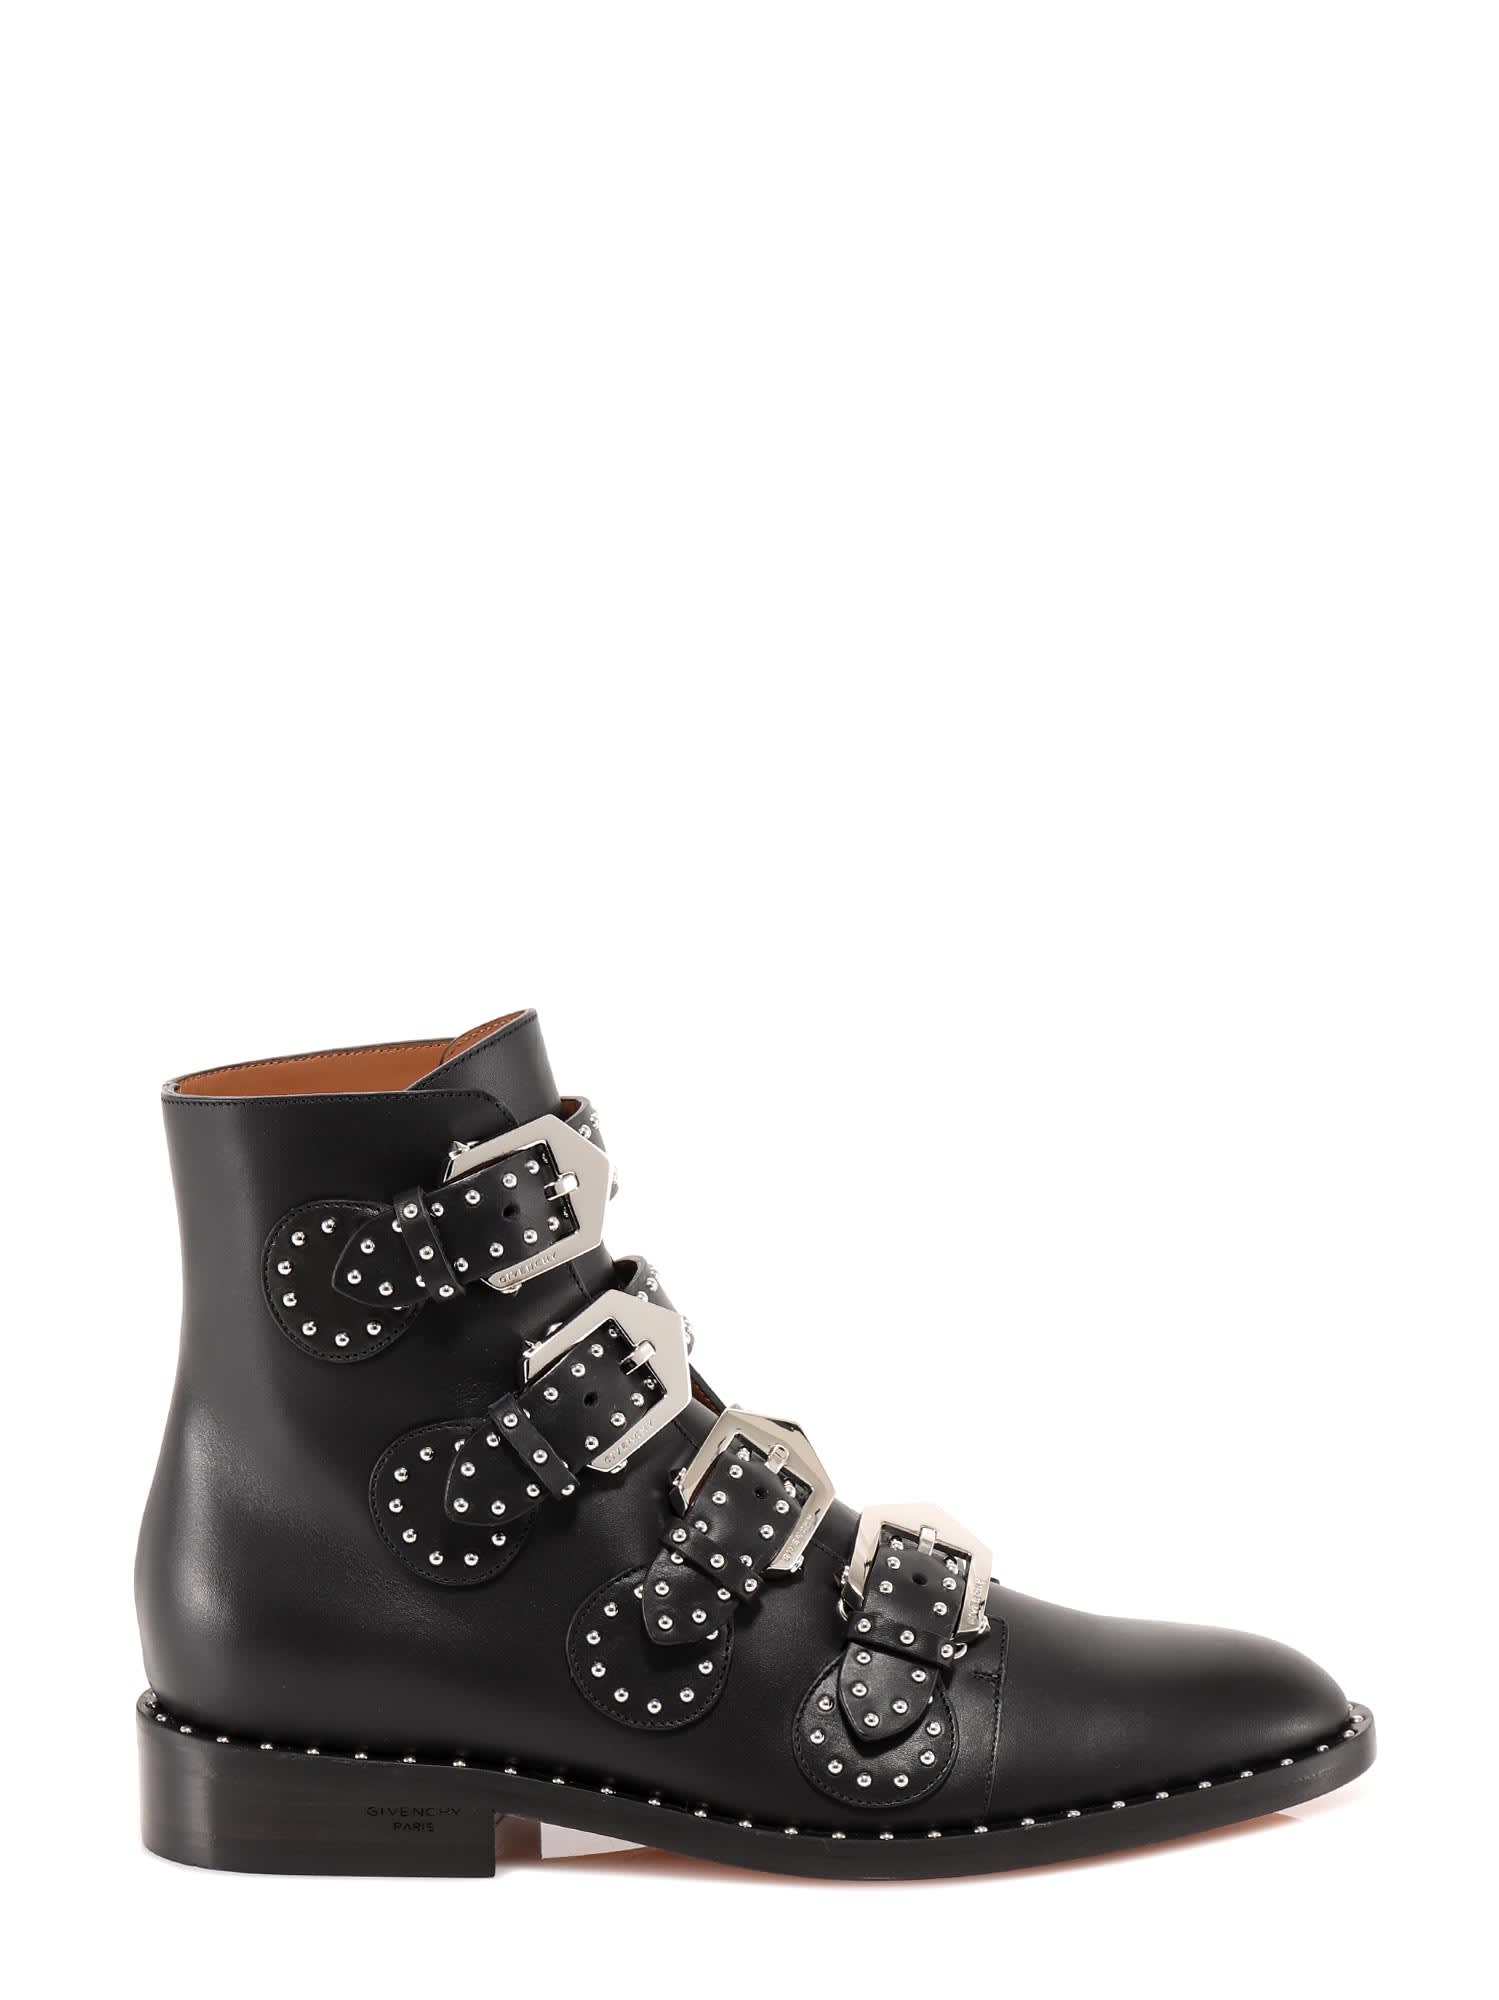 Givenchy Studded Buckled Boots